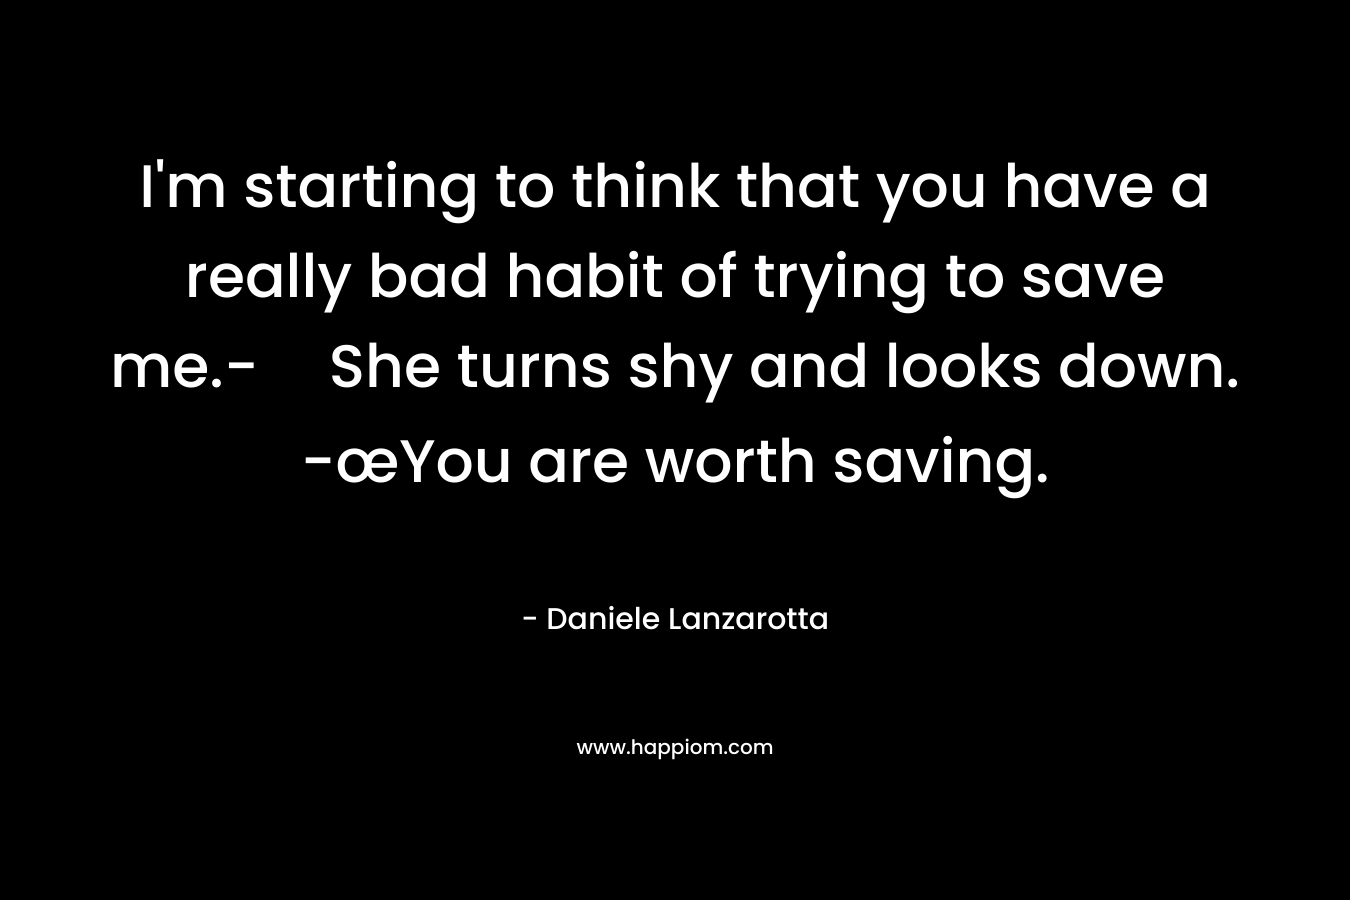 I’m starting to think that you have a really bad habit of trying to save me.-She turns shy and looks down. -œYou are worth saving. – Daniele Lanzarotta